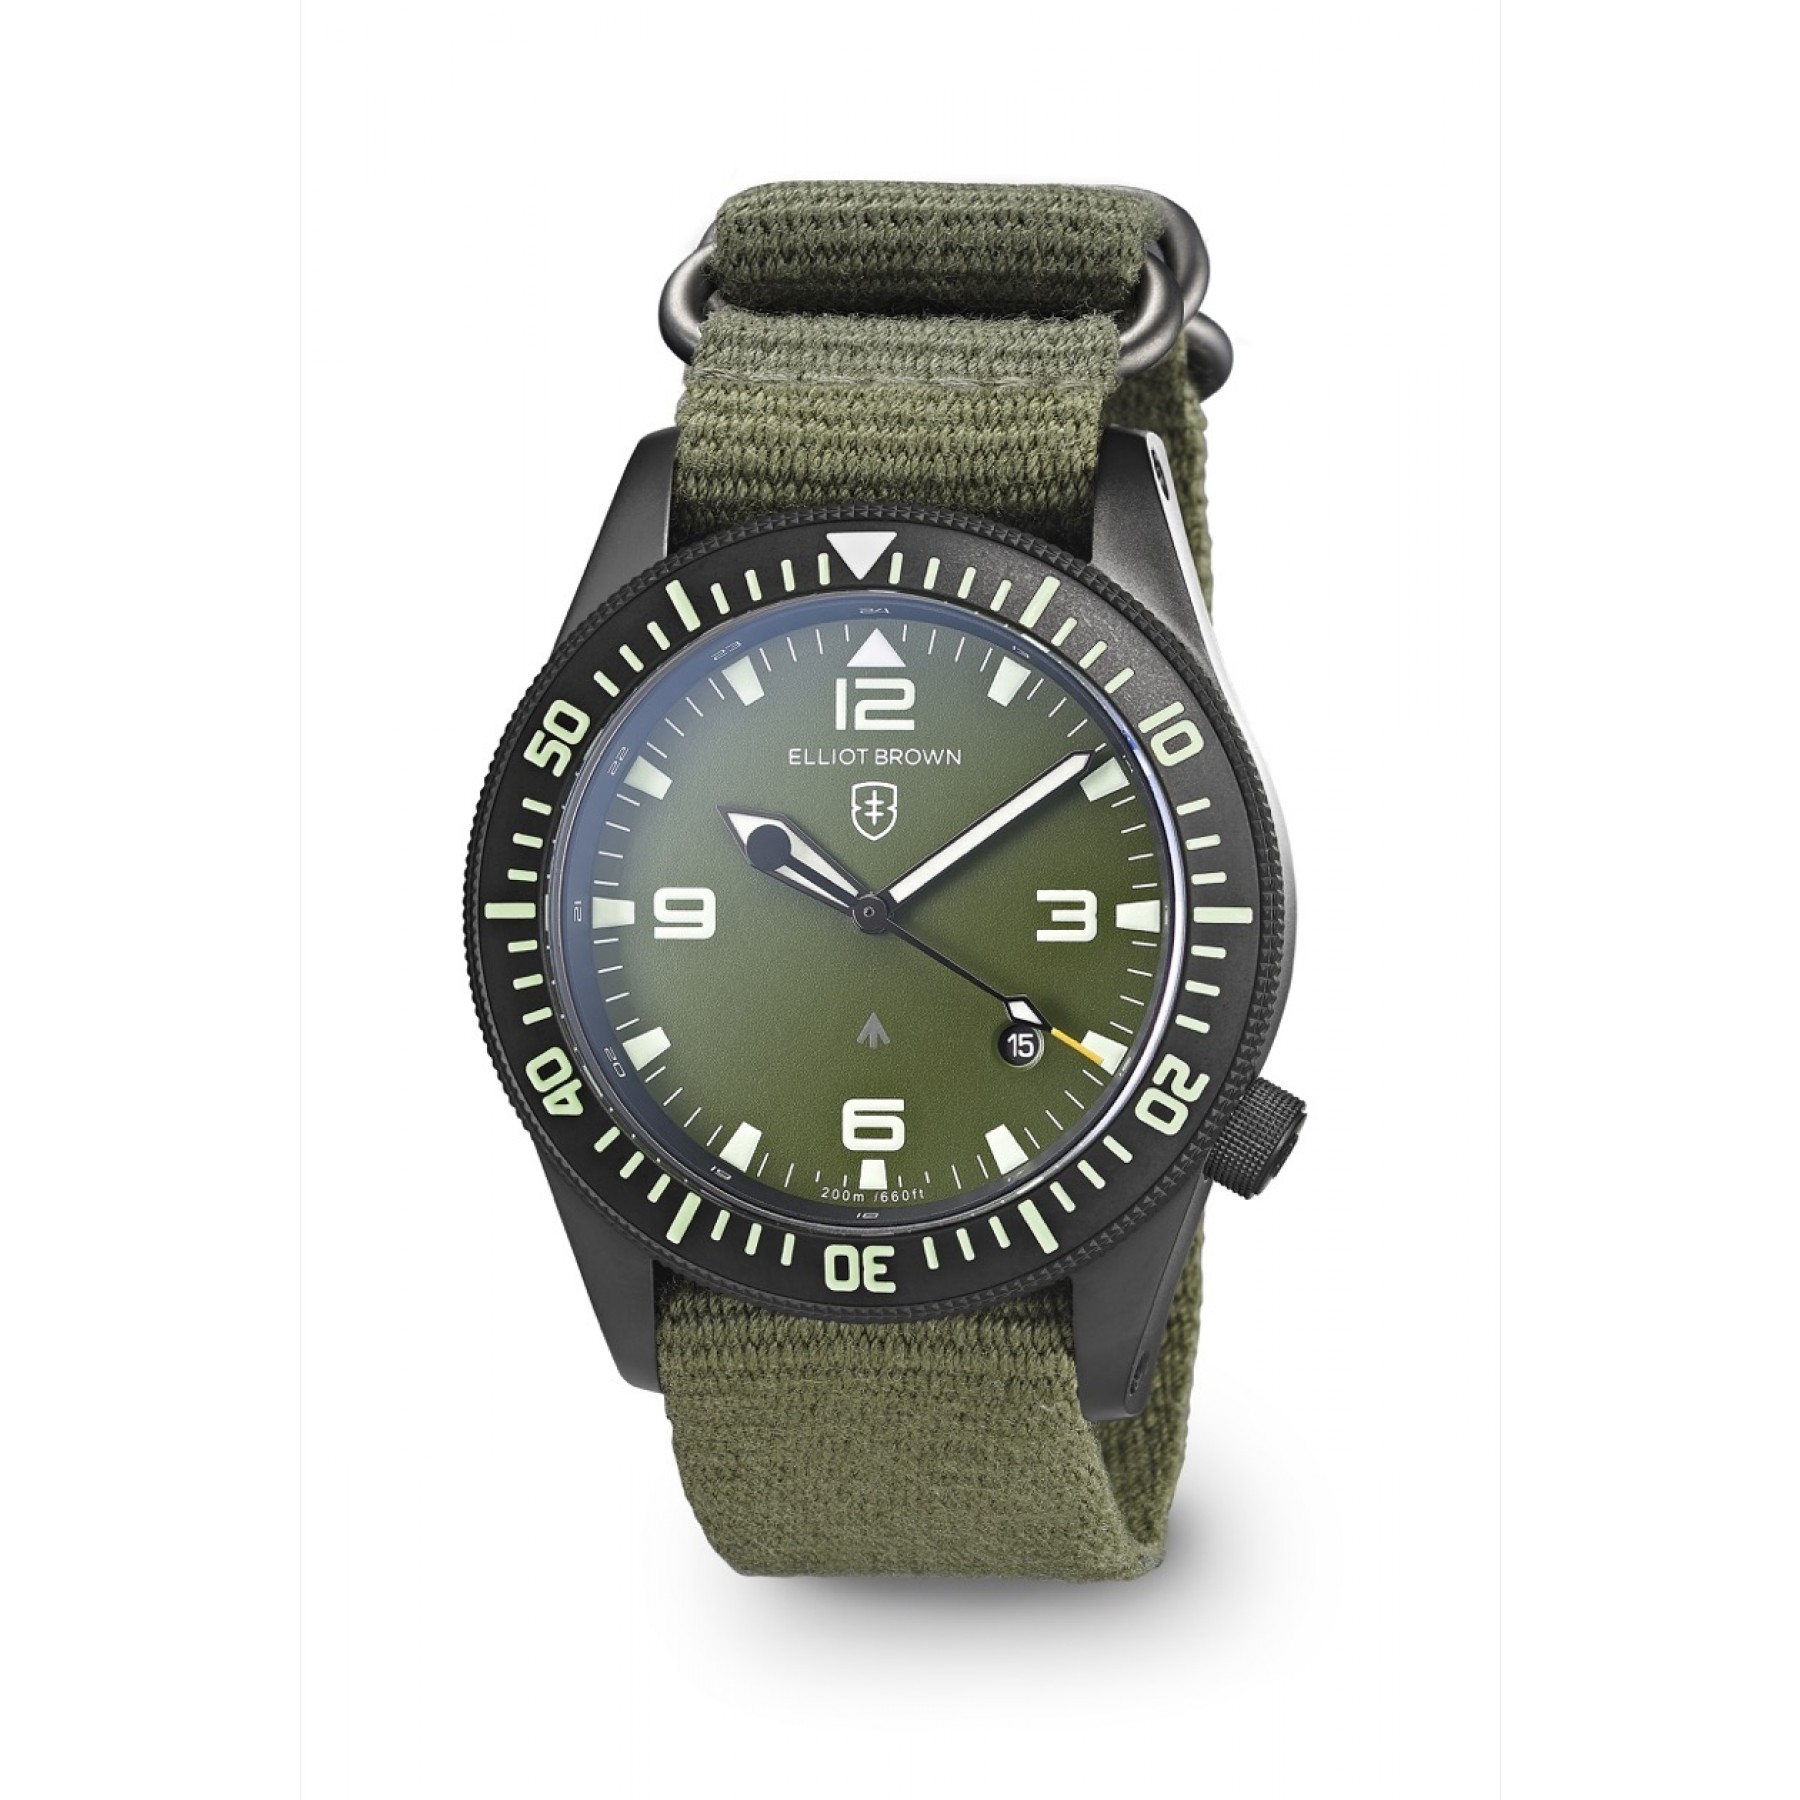 Elliot Brown's new Holton watches Elliot-brown-holton-watch-ablogtowatch-3